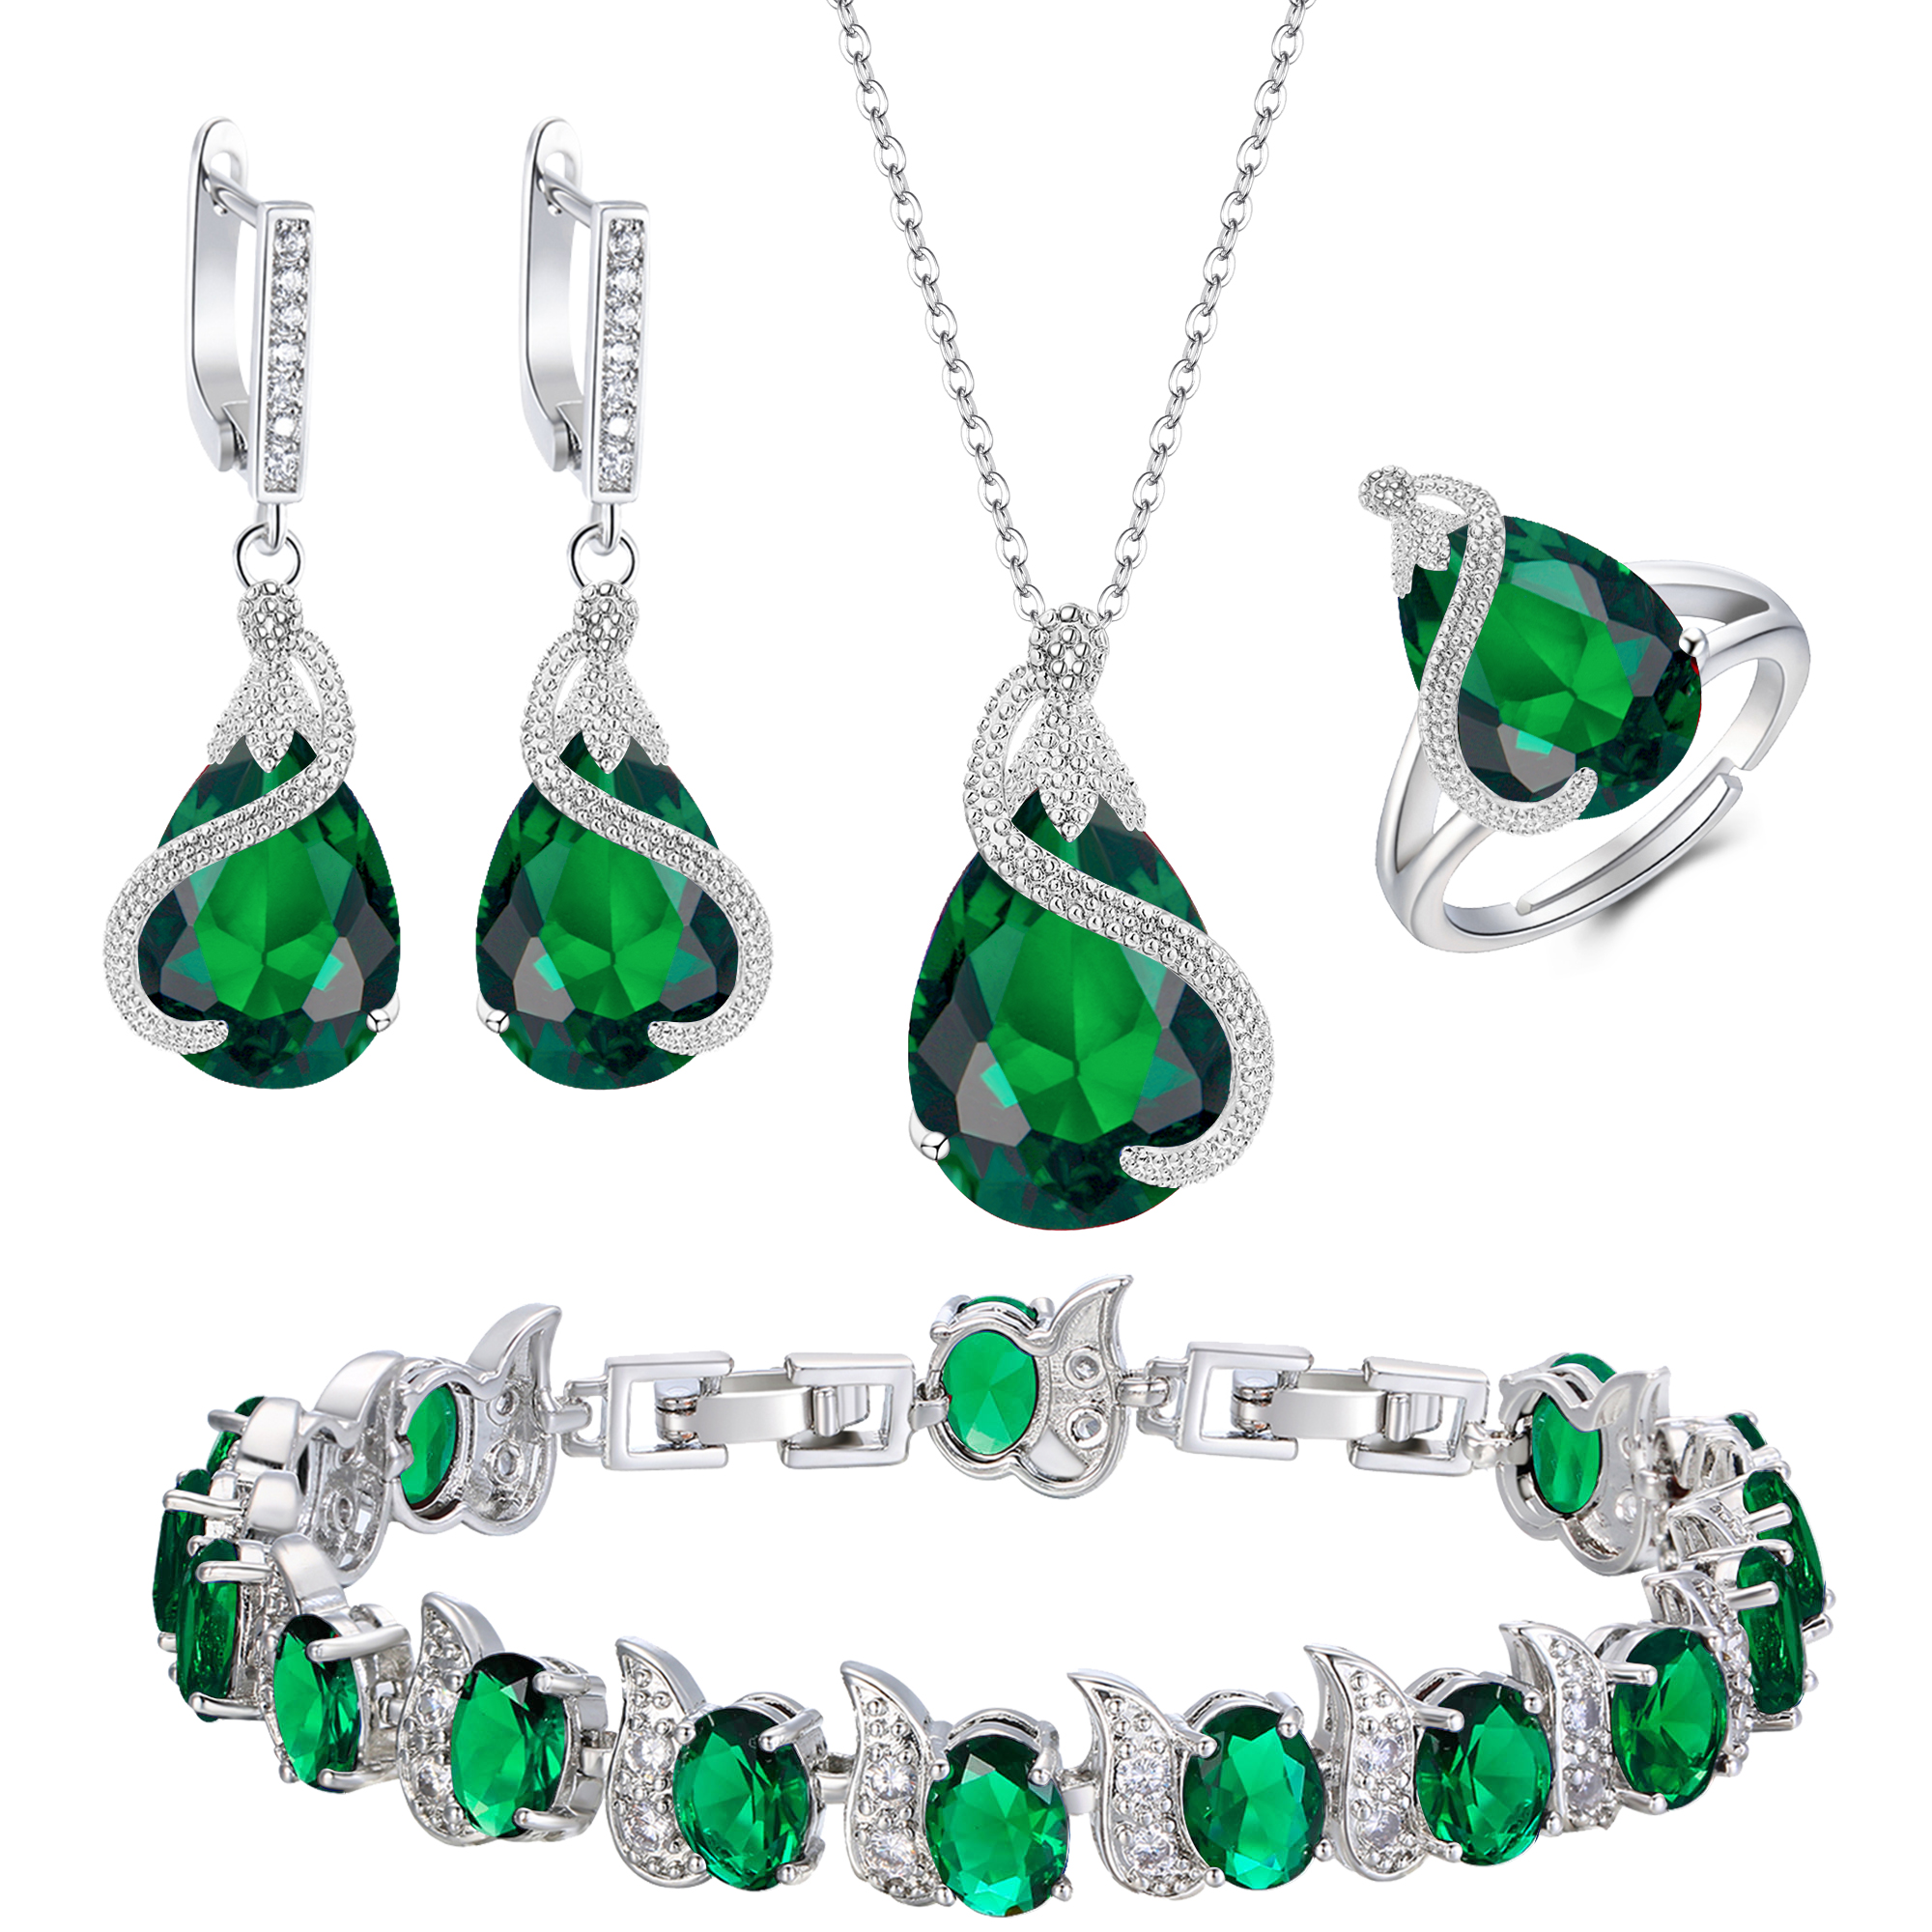 Wedure Women Bridal Jewelry Set for Bride, Emerald Birthstone CZ Necklace Earrings Bracelet Ring Sets for Birthday/Mother's Day Gifts for Women Green Silver-Tone - image 1 of 5